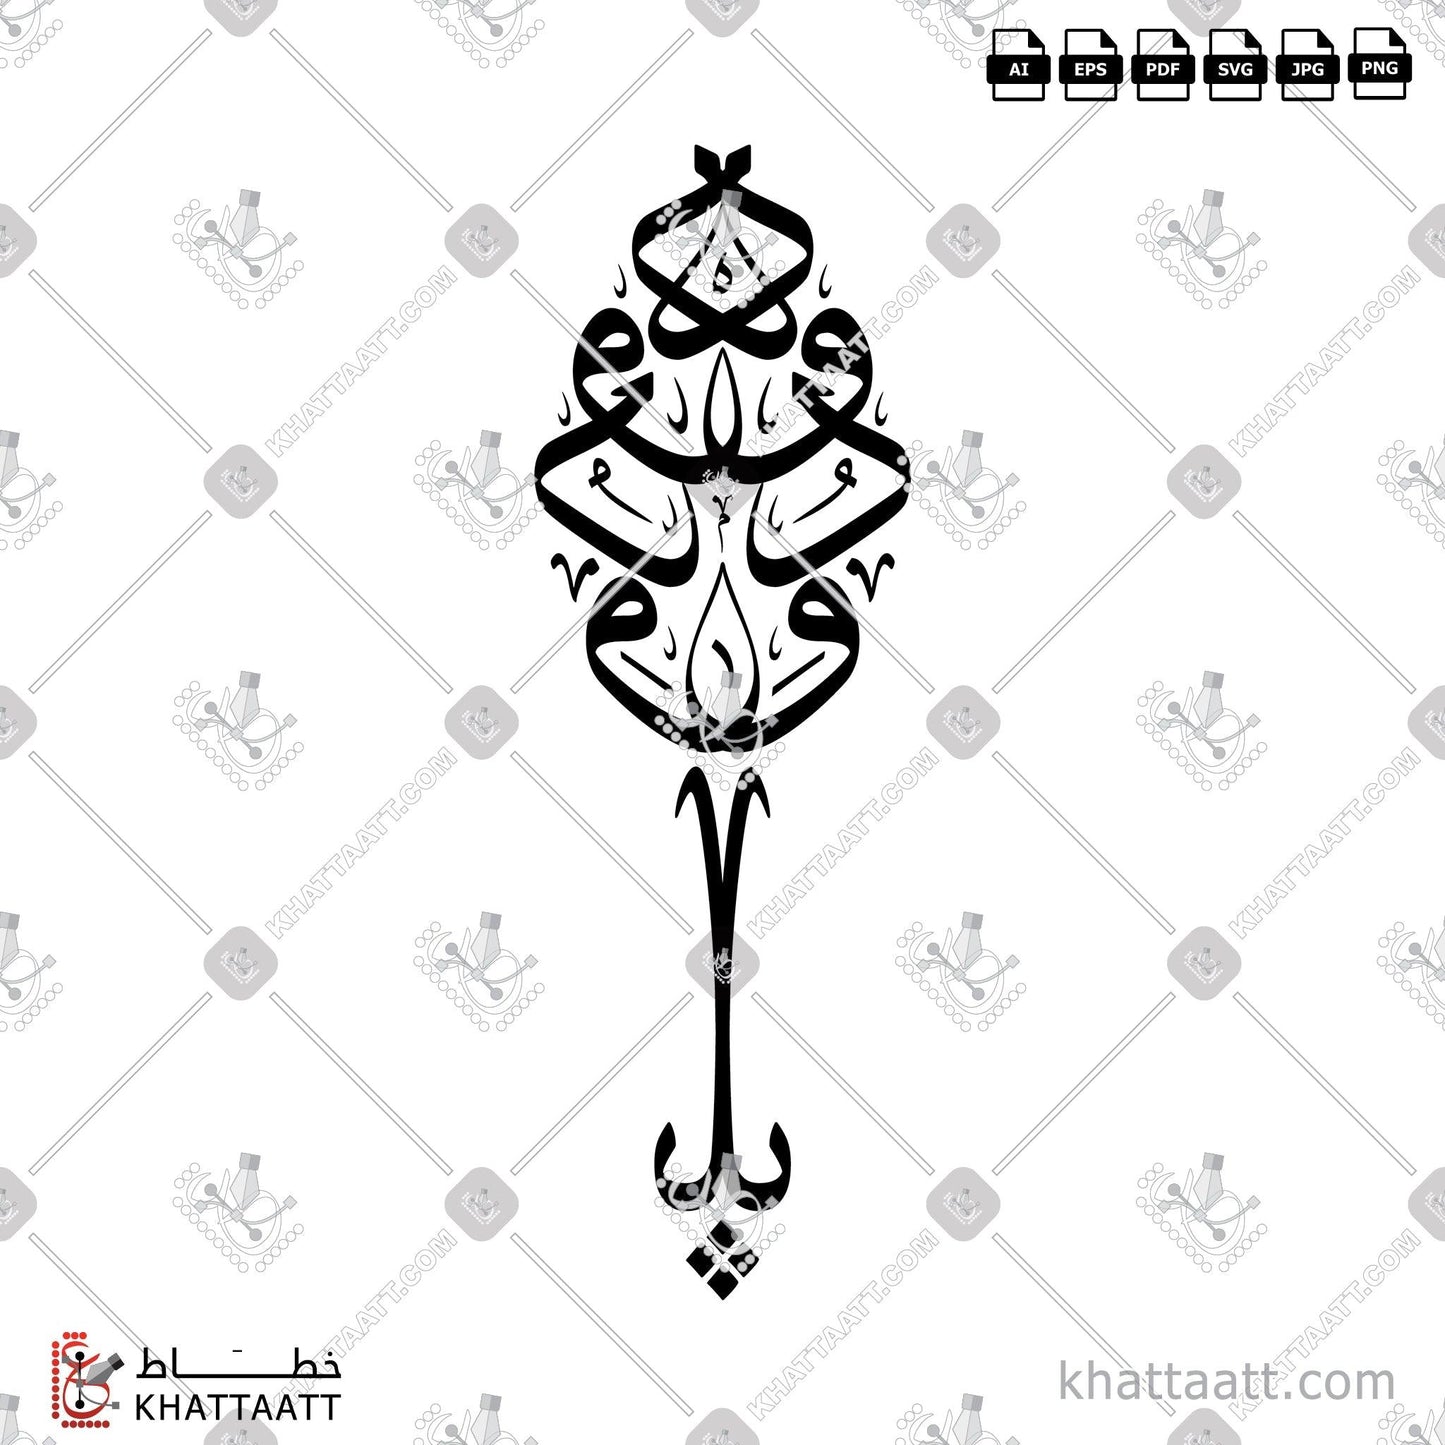 Download Arabic Calligraphy of Ya Wadud - يا ودود in Thuluth - خط الثلث in vector and .png